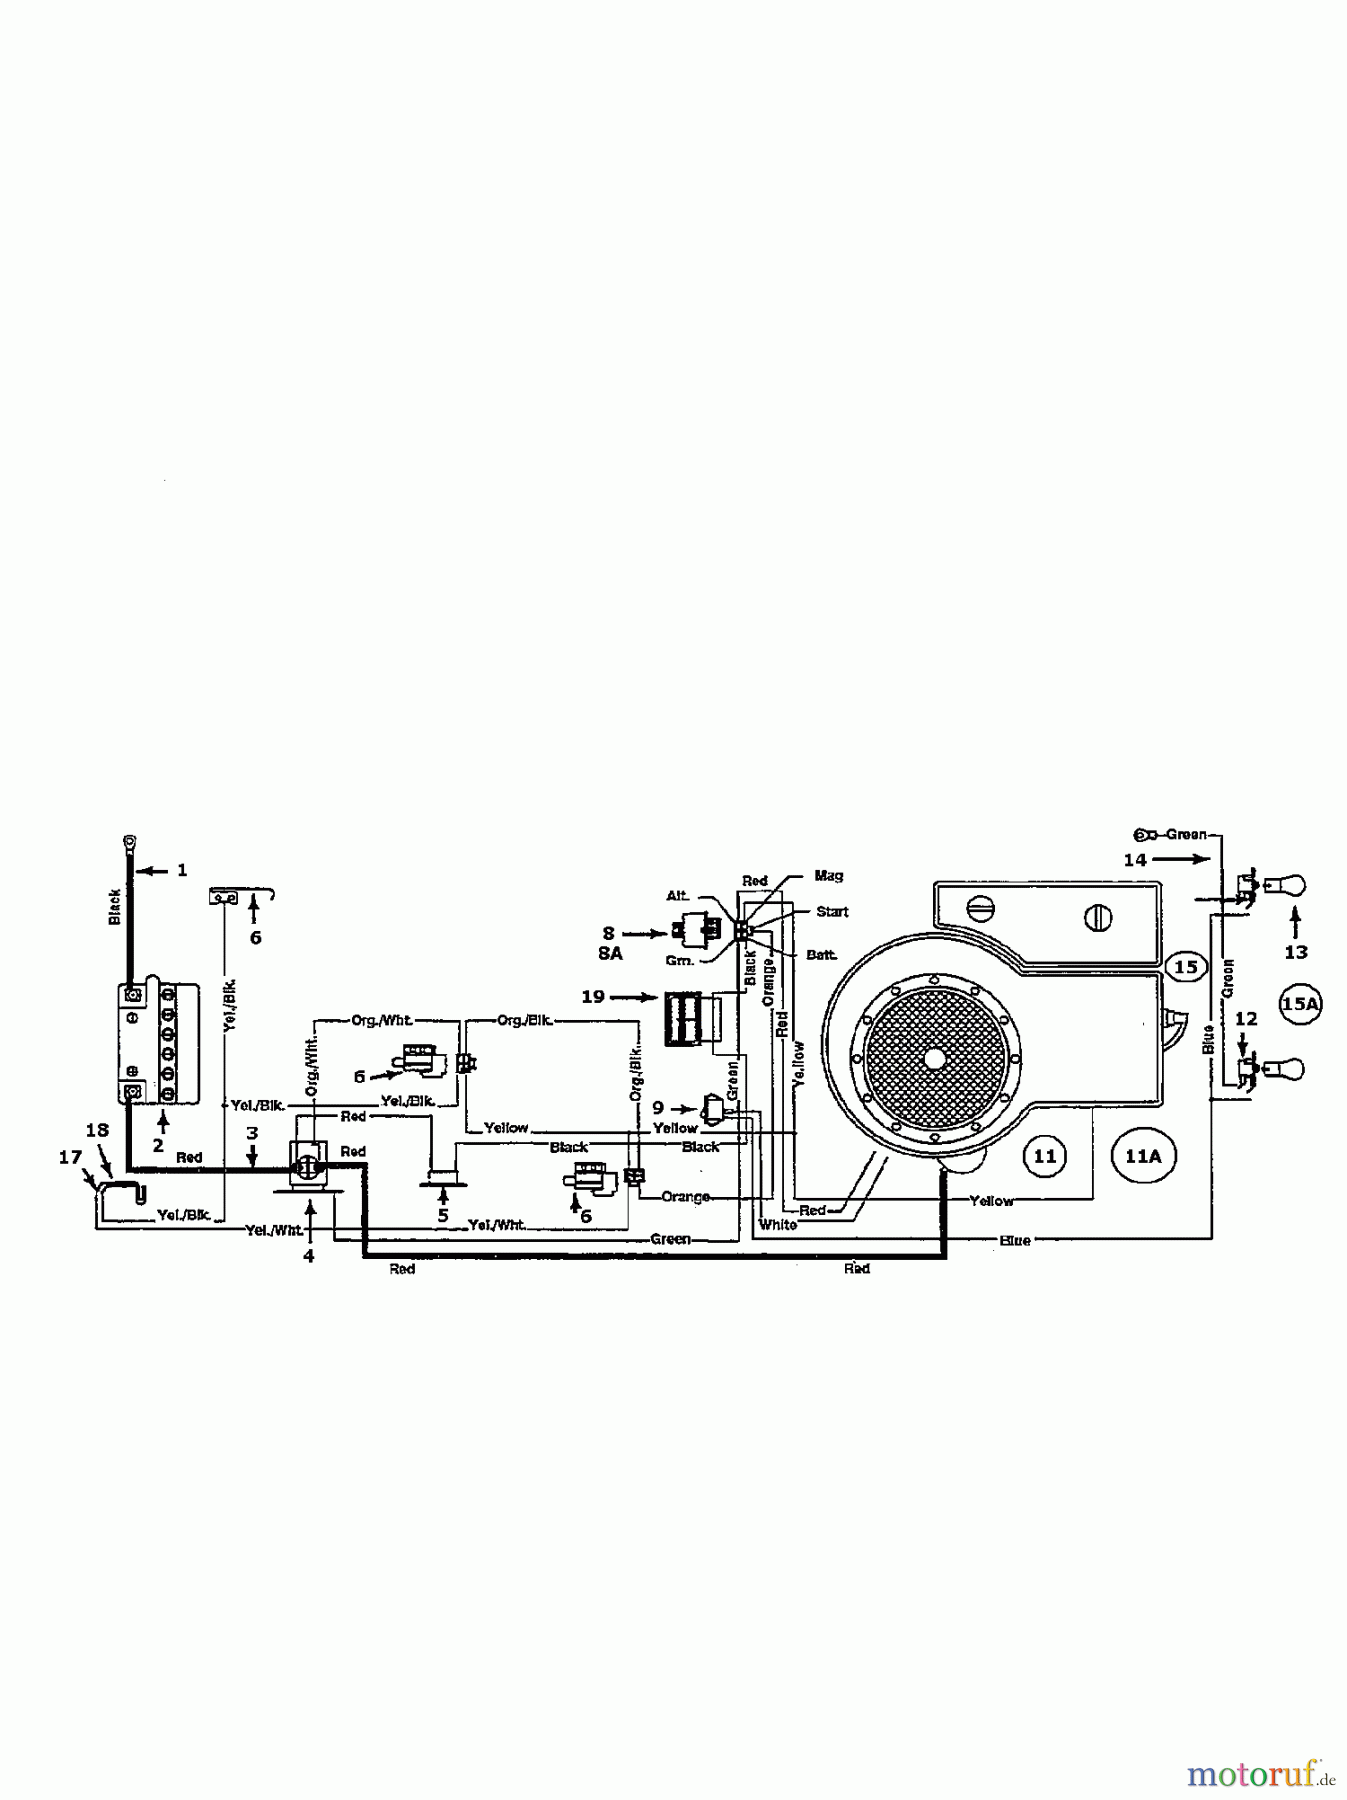  Topflite Lawn tractors B 10 135C452D649  (1995) Wiring diagram single cylinder